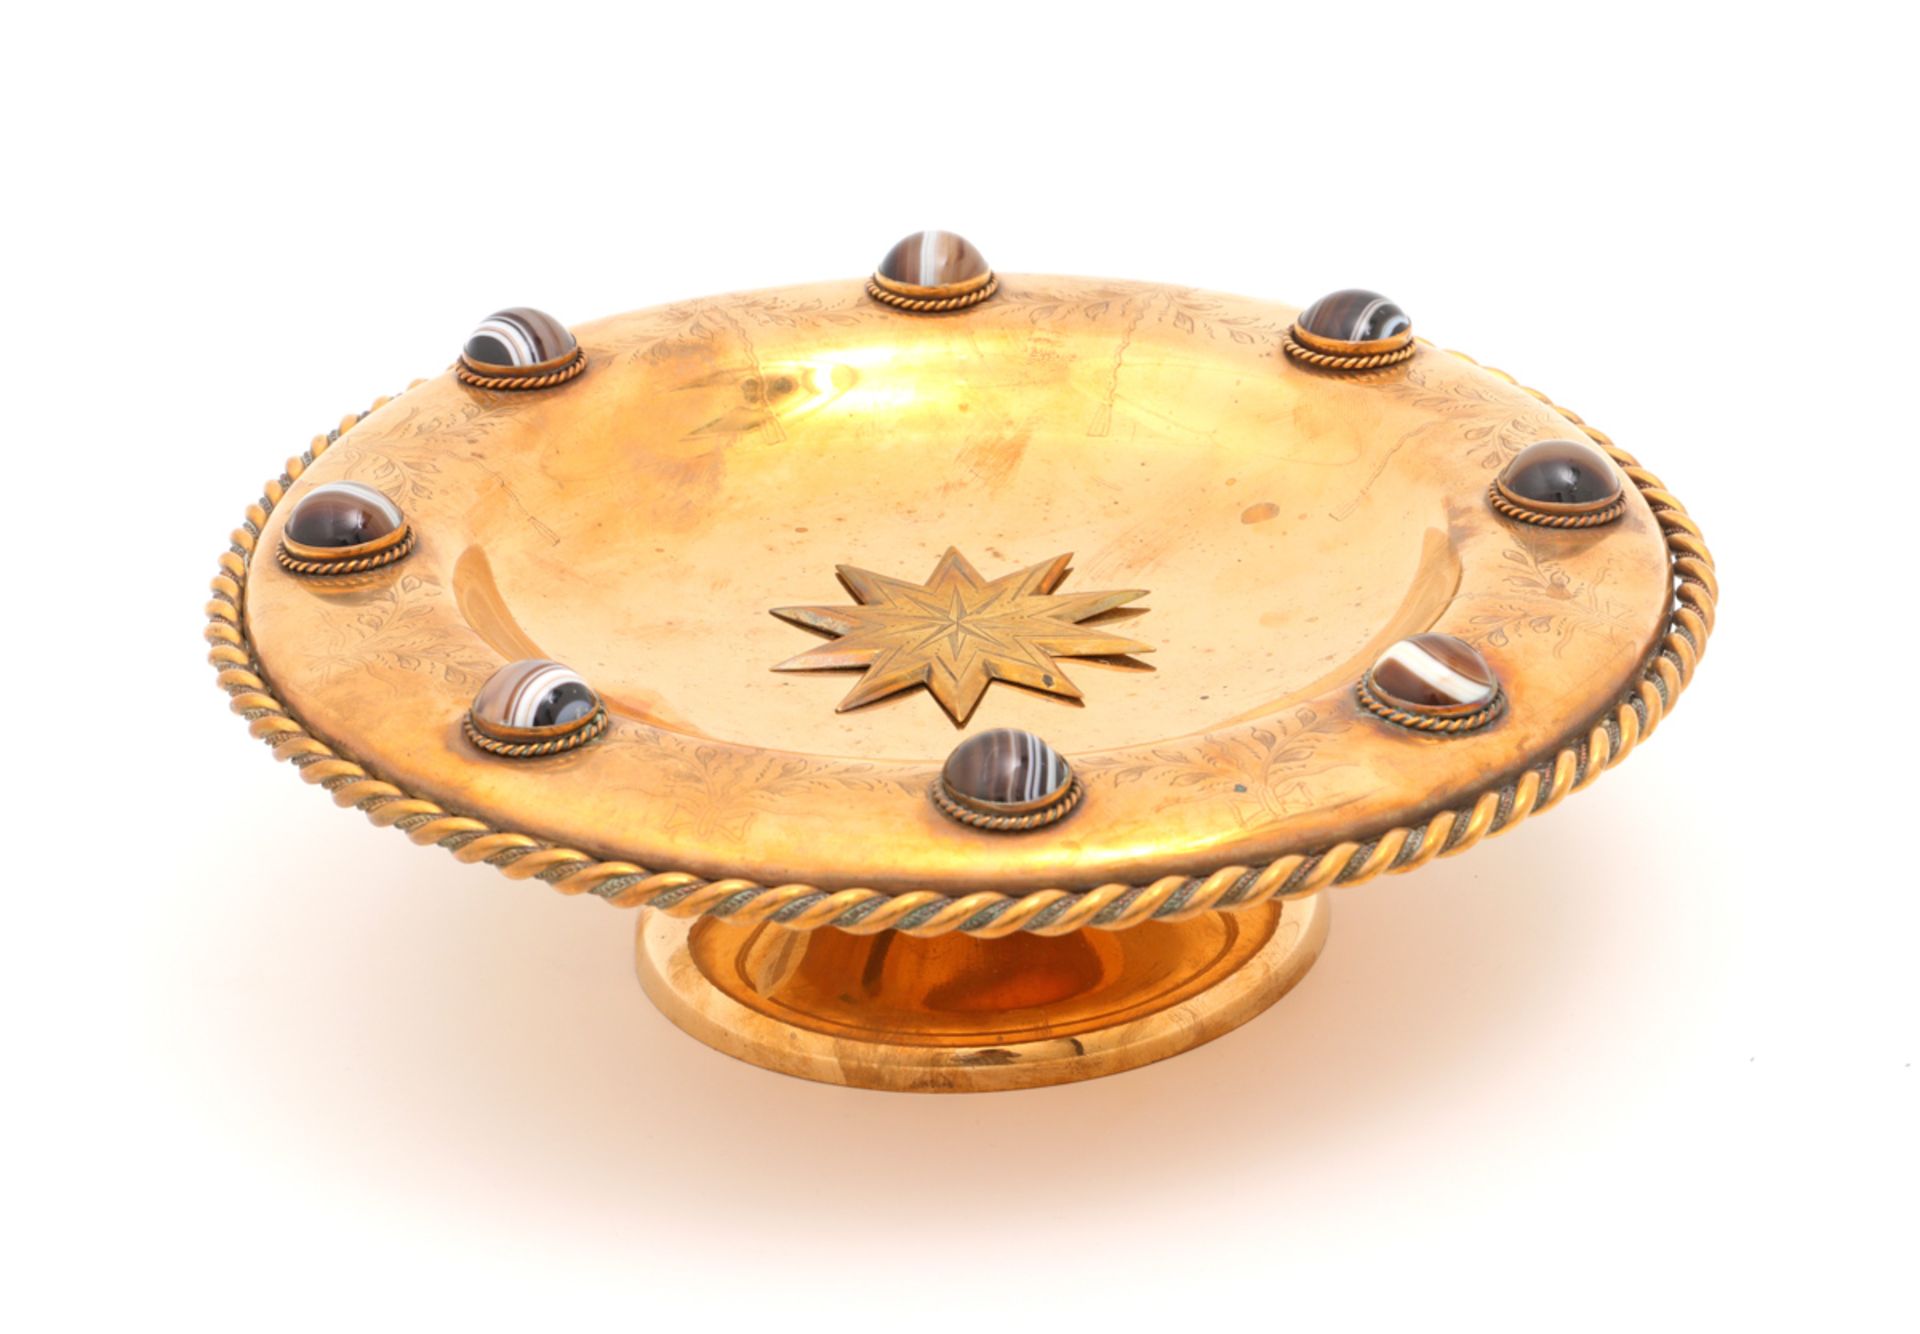 A VICTORIAN BOWL Brass, decoration in relief with garlands and agate cabochons. Scotland, mid 19th